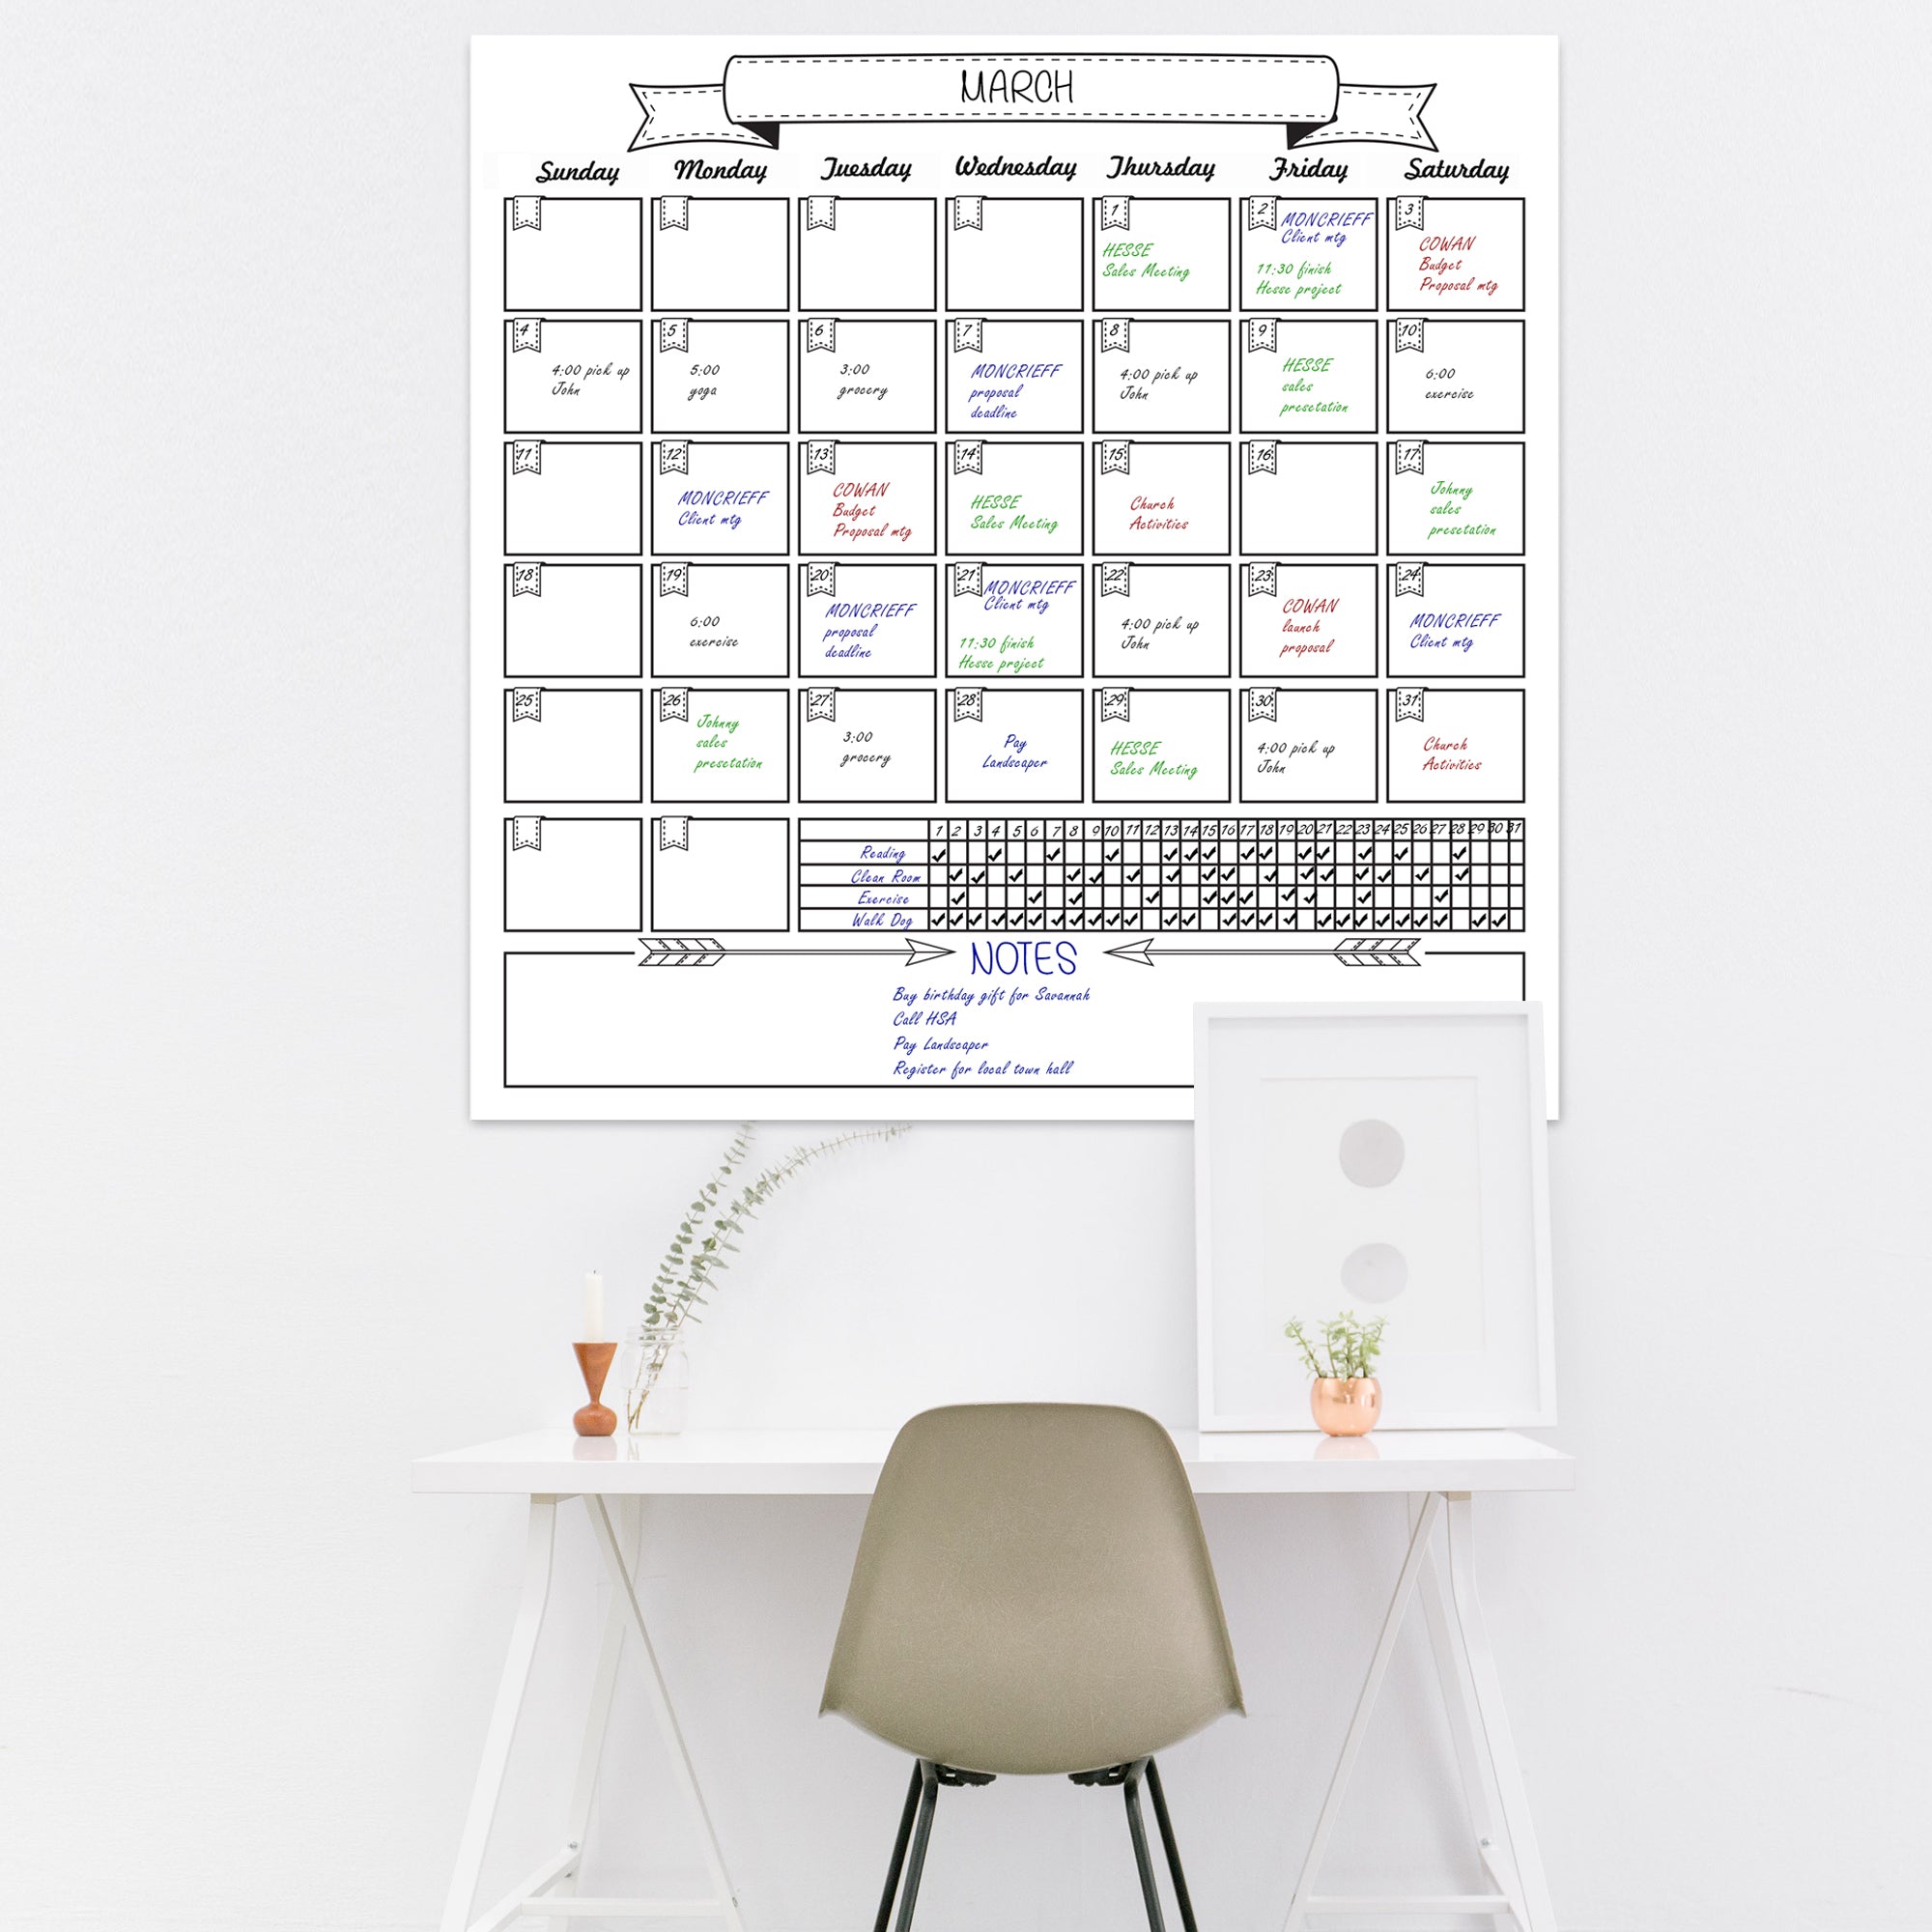 OfficeAid Laminated Jumbo Dry Erase Wall Calendar 36-Inch by 48-Inch